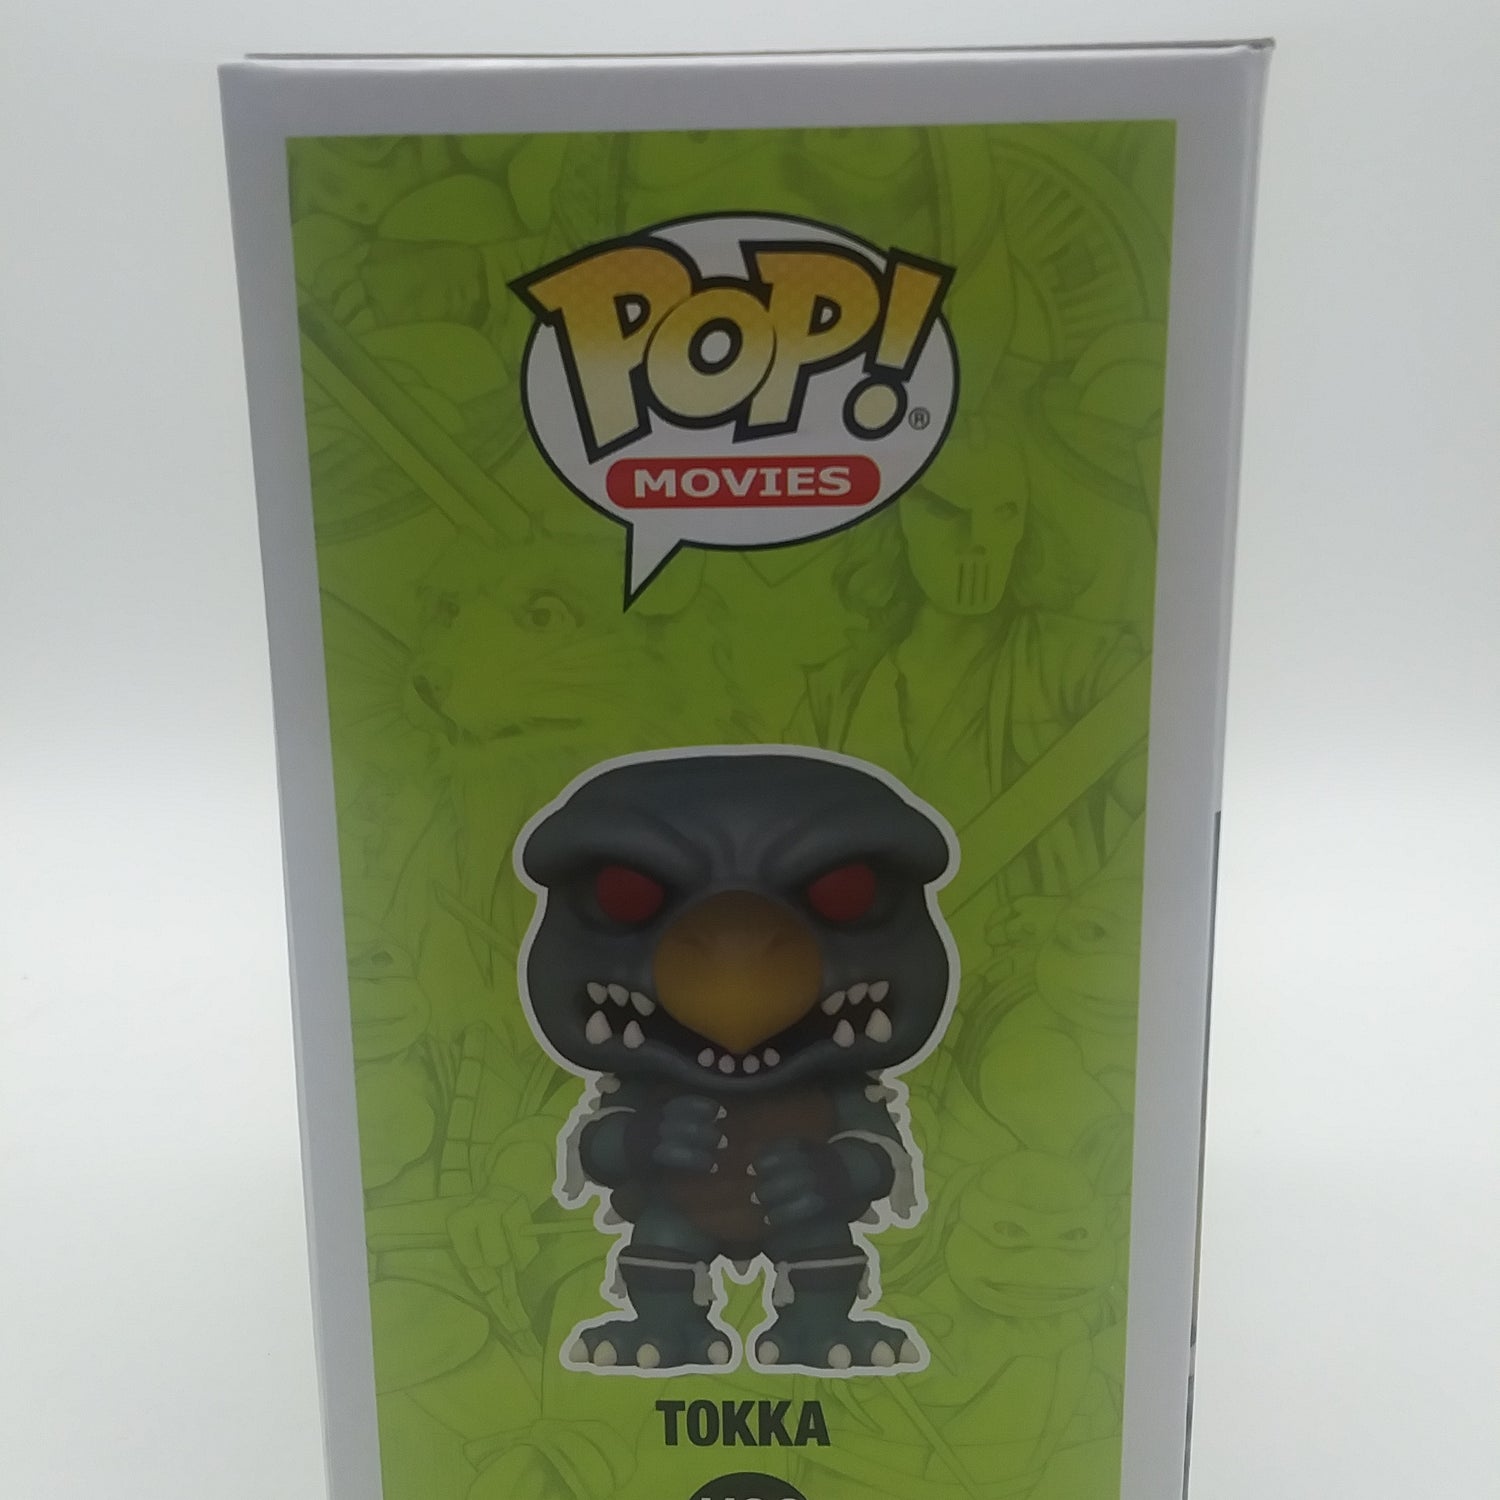 The right side of the box. There is a picture of the figure on the side and the funko pop logo above it.